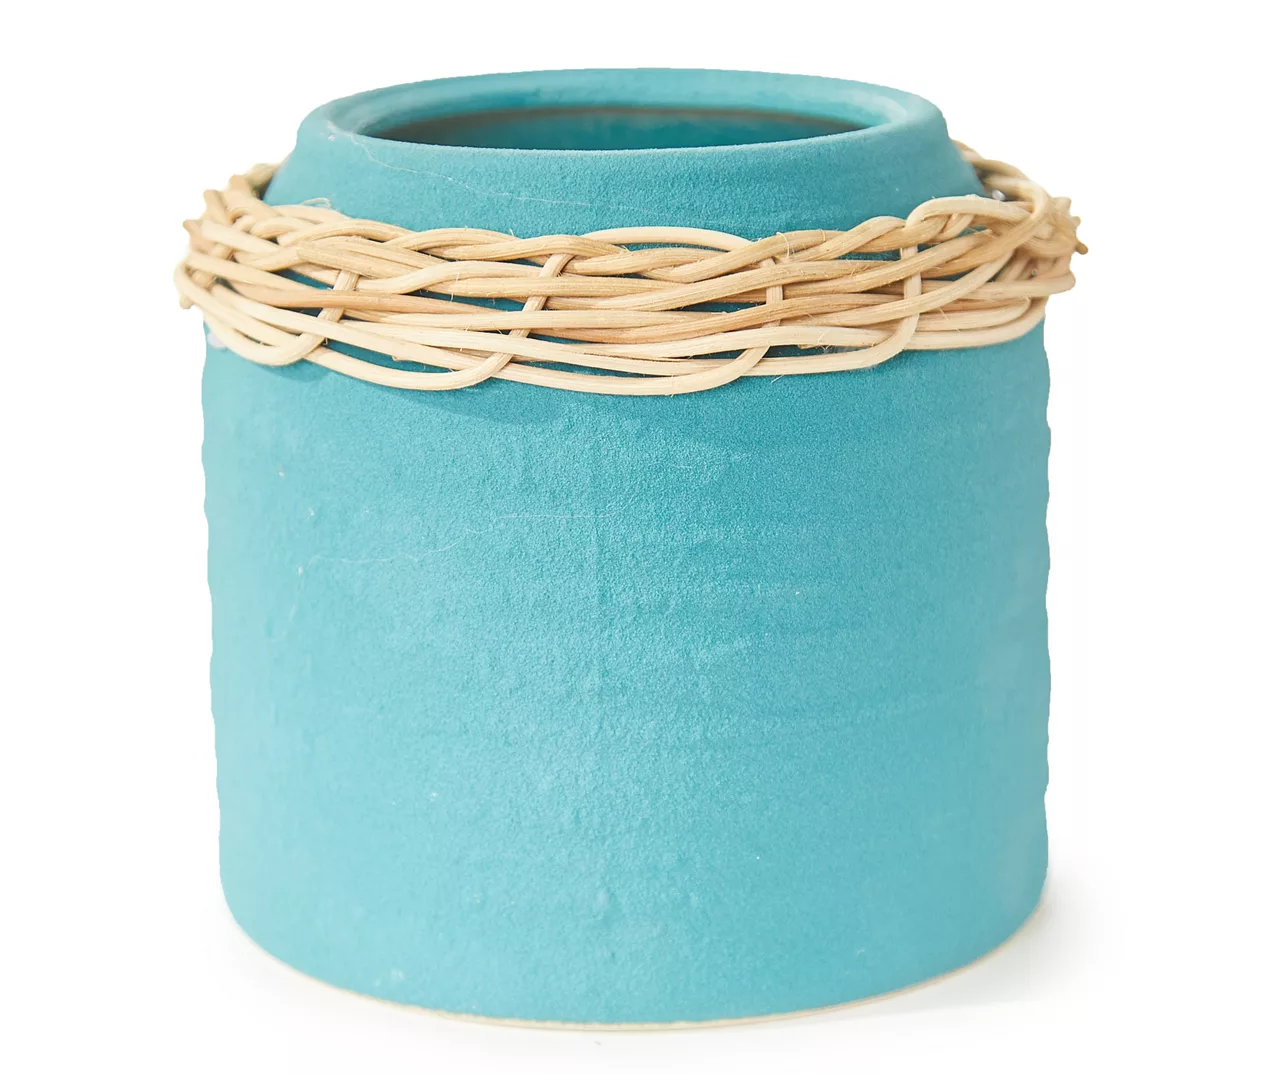 NEW Teal Bamboo Weave Textured Ceramic Planter Gardening Flower Pot 6 x 5.5 in - £8.02 GBP